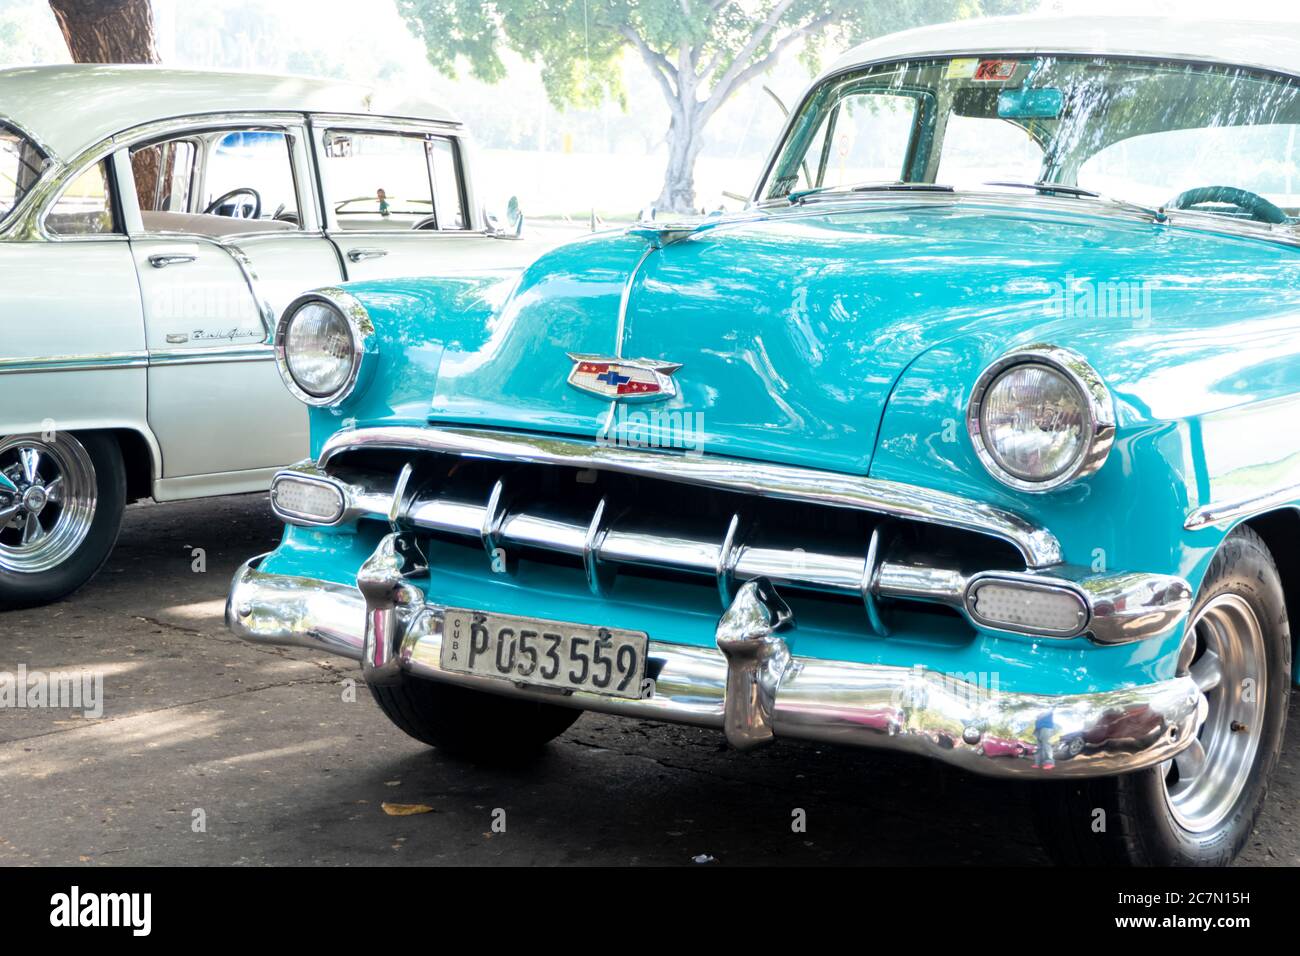 Up close view of a teal colored classic Cuban car. Featuring the front grill. Stock Photo